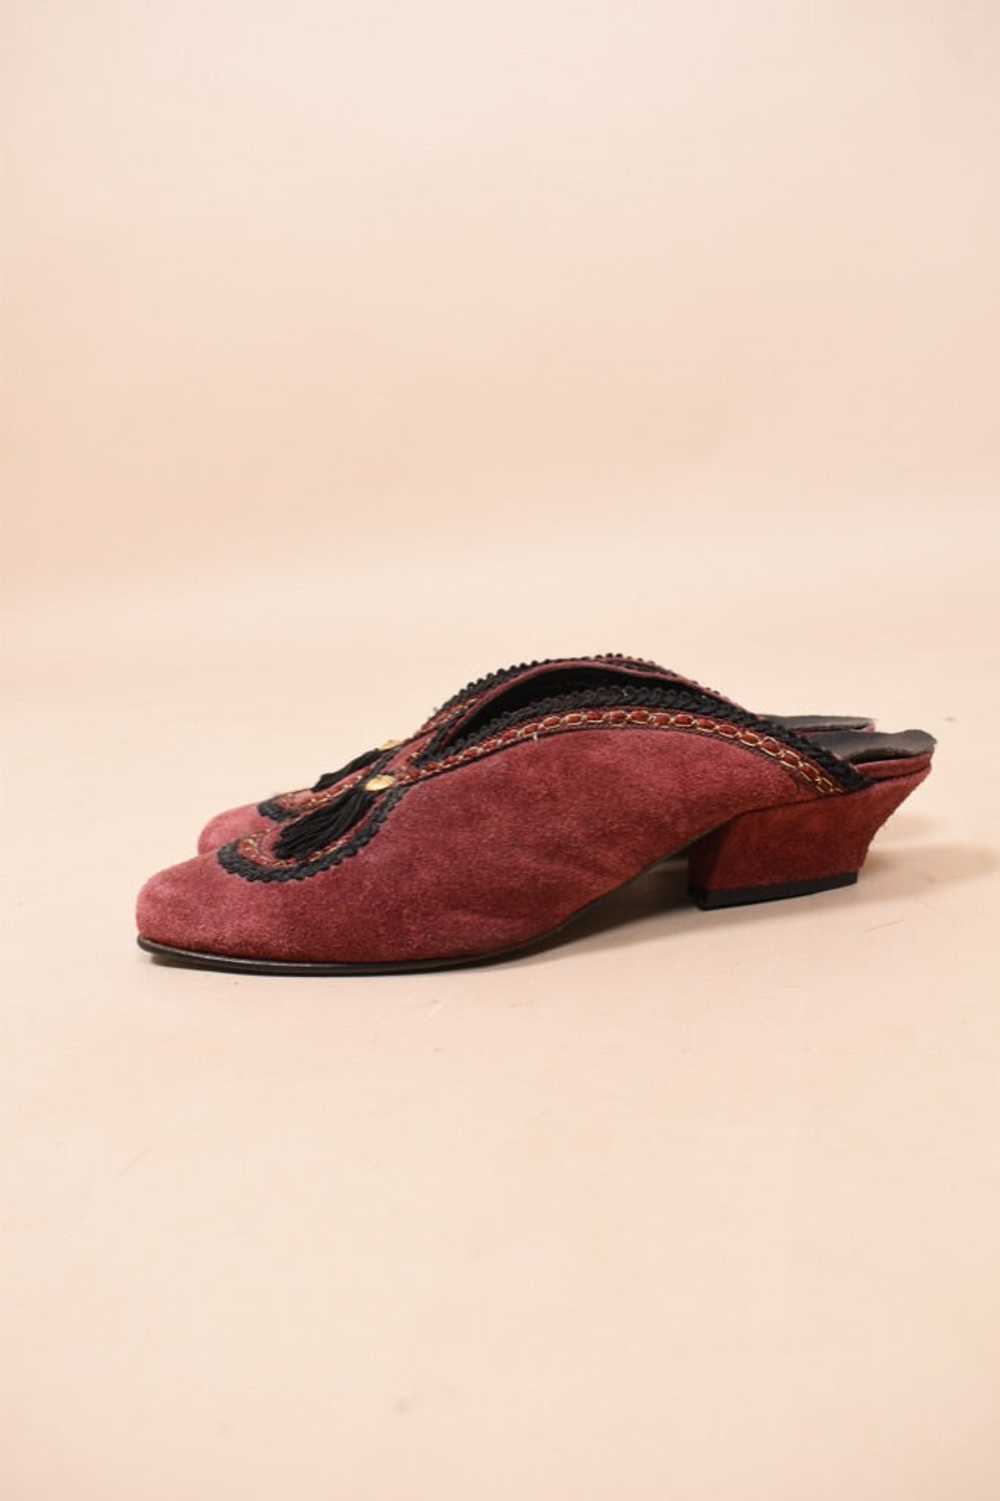 Red Suede Mules With Tassels, 8 - image 4